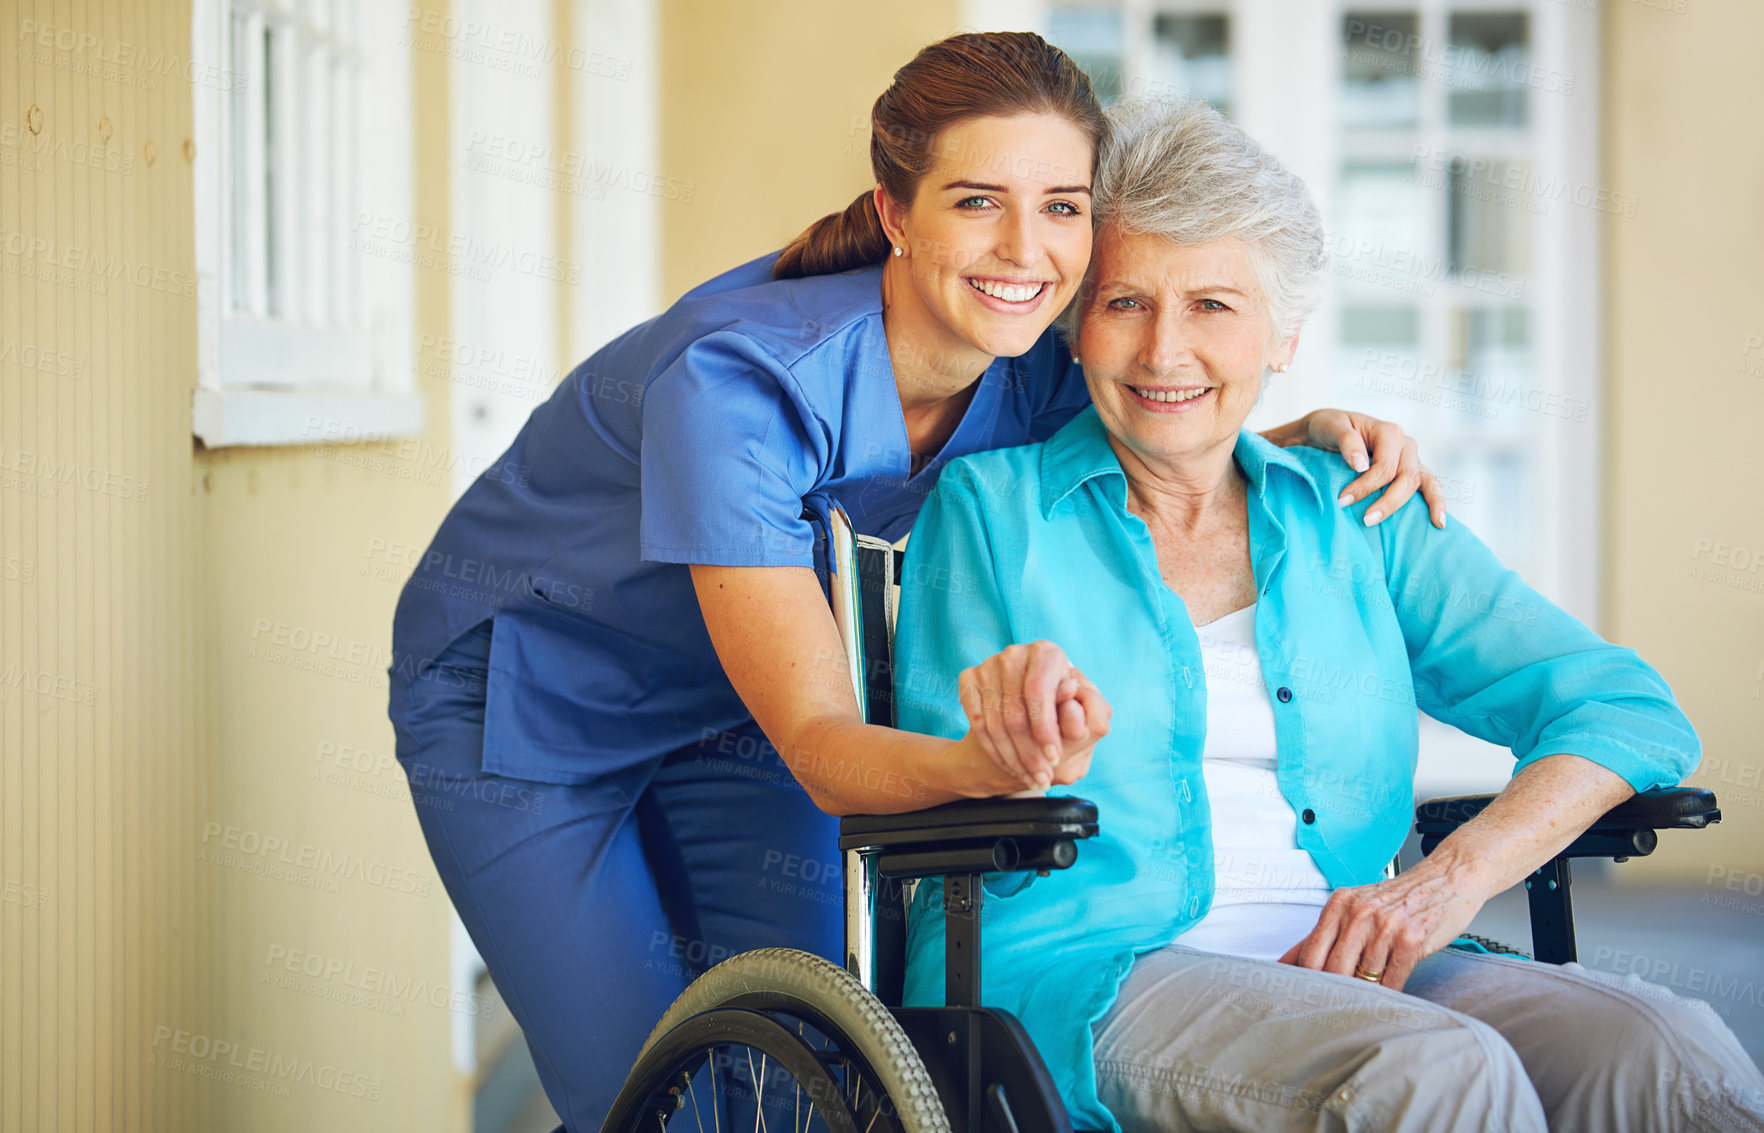 Buy stock photo Portrait of nurse, hugging or old woman in wheelchair in hospital helping a senior patient for support. Holding hands, happy smile or healthcare caregiver smiling with an elderly lady with disability